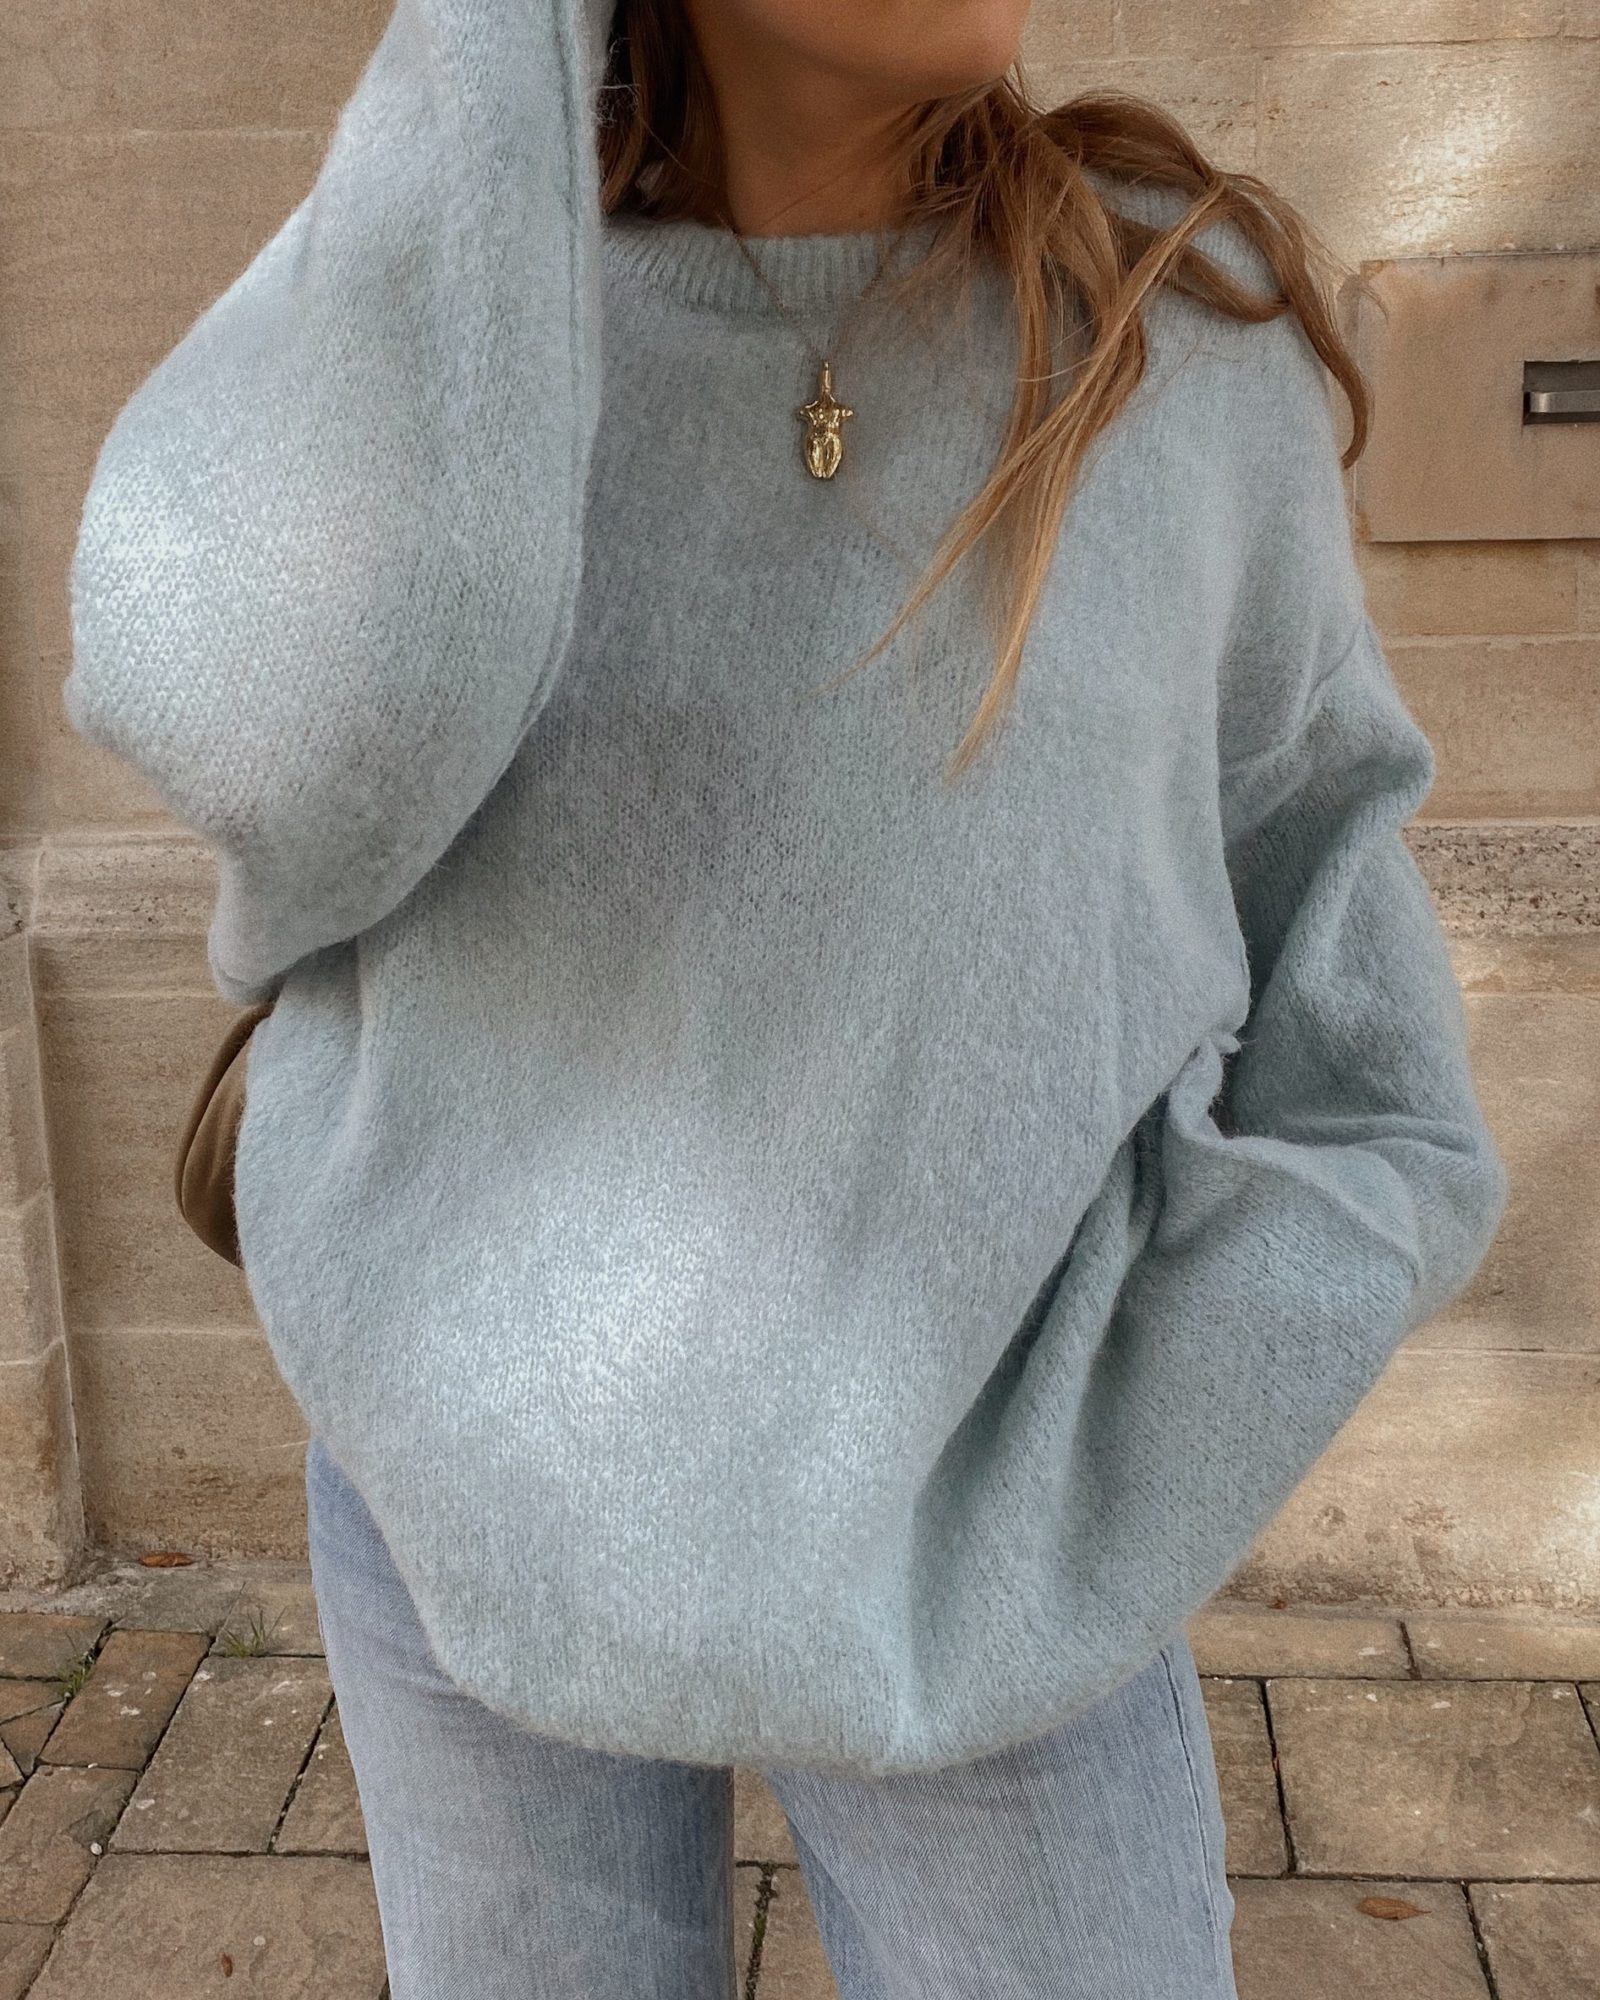 Autumn Outifts - Free People Jumper